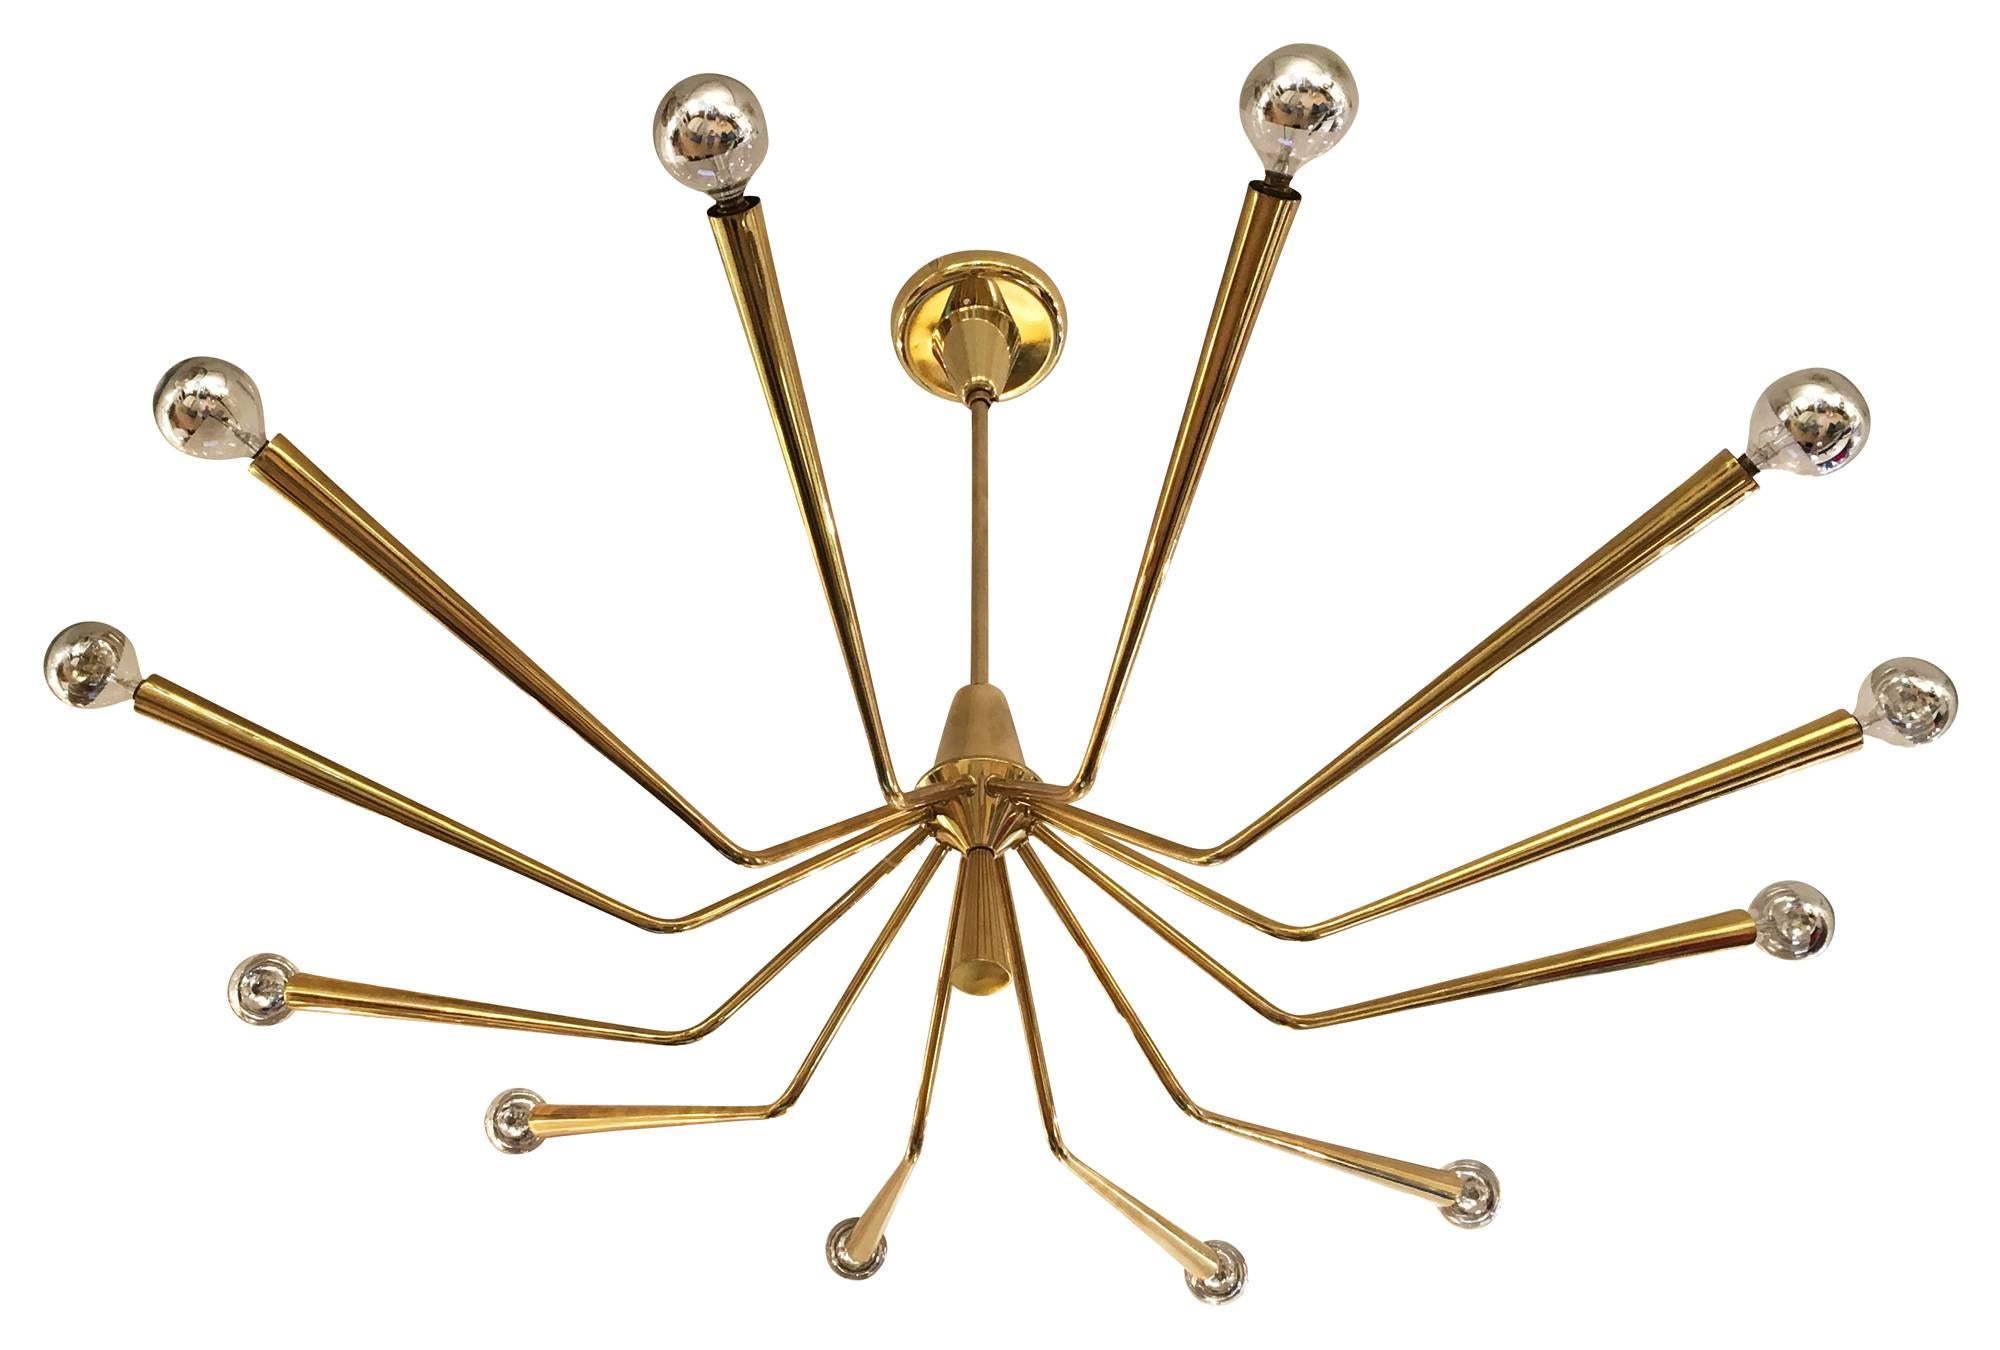 Large brass chandelier designed by Oscar Torlasco for Lumi in the 1960s. Holds 12 candelabra sockets.